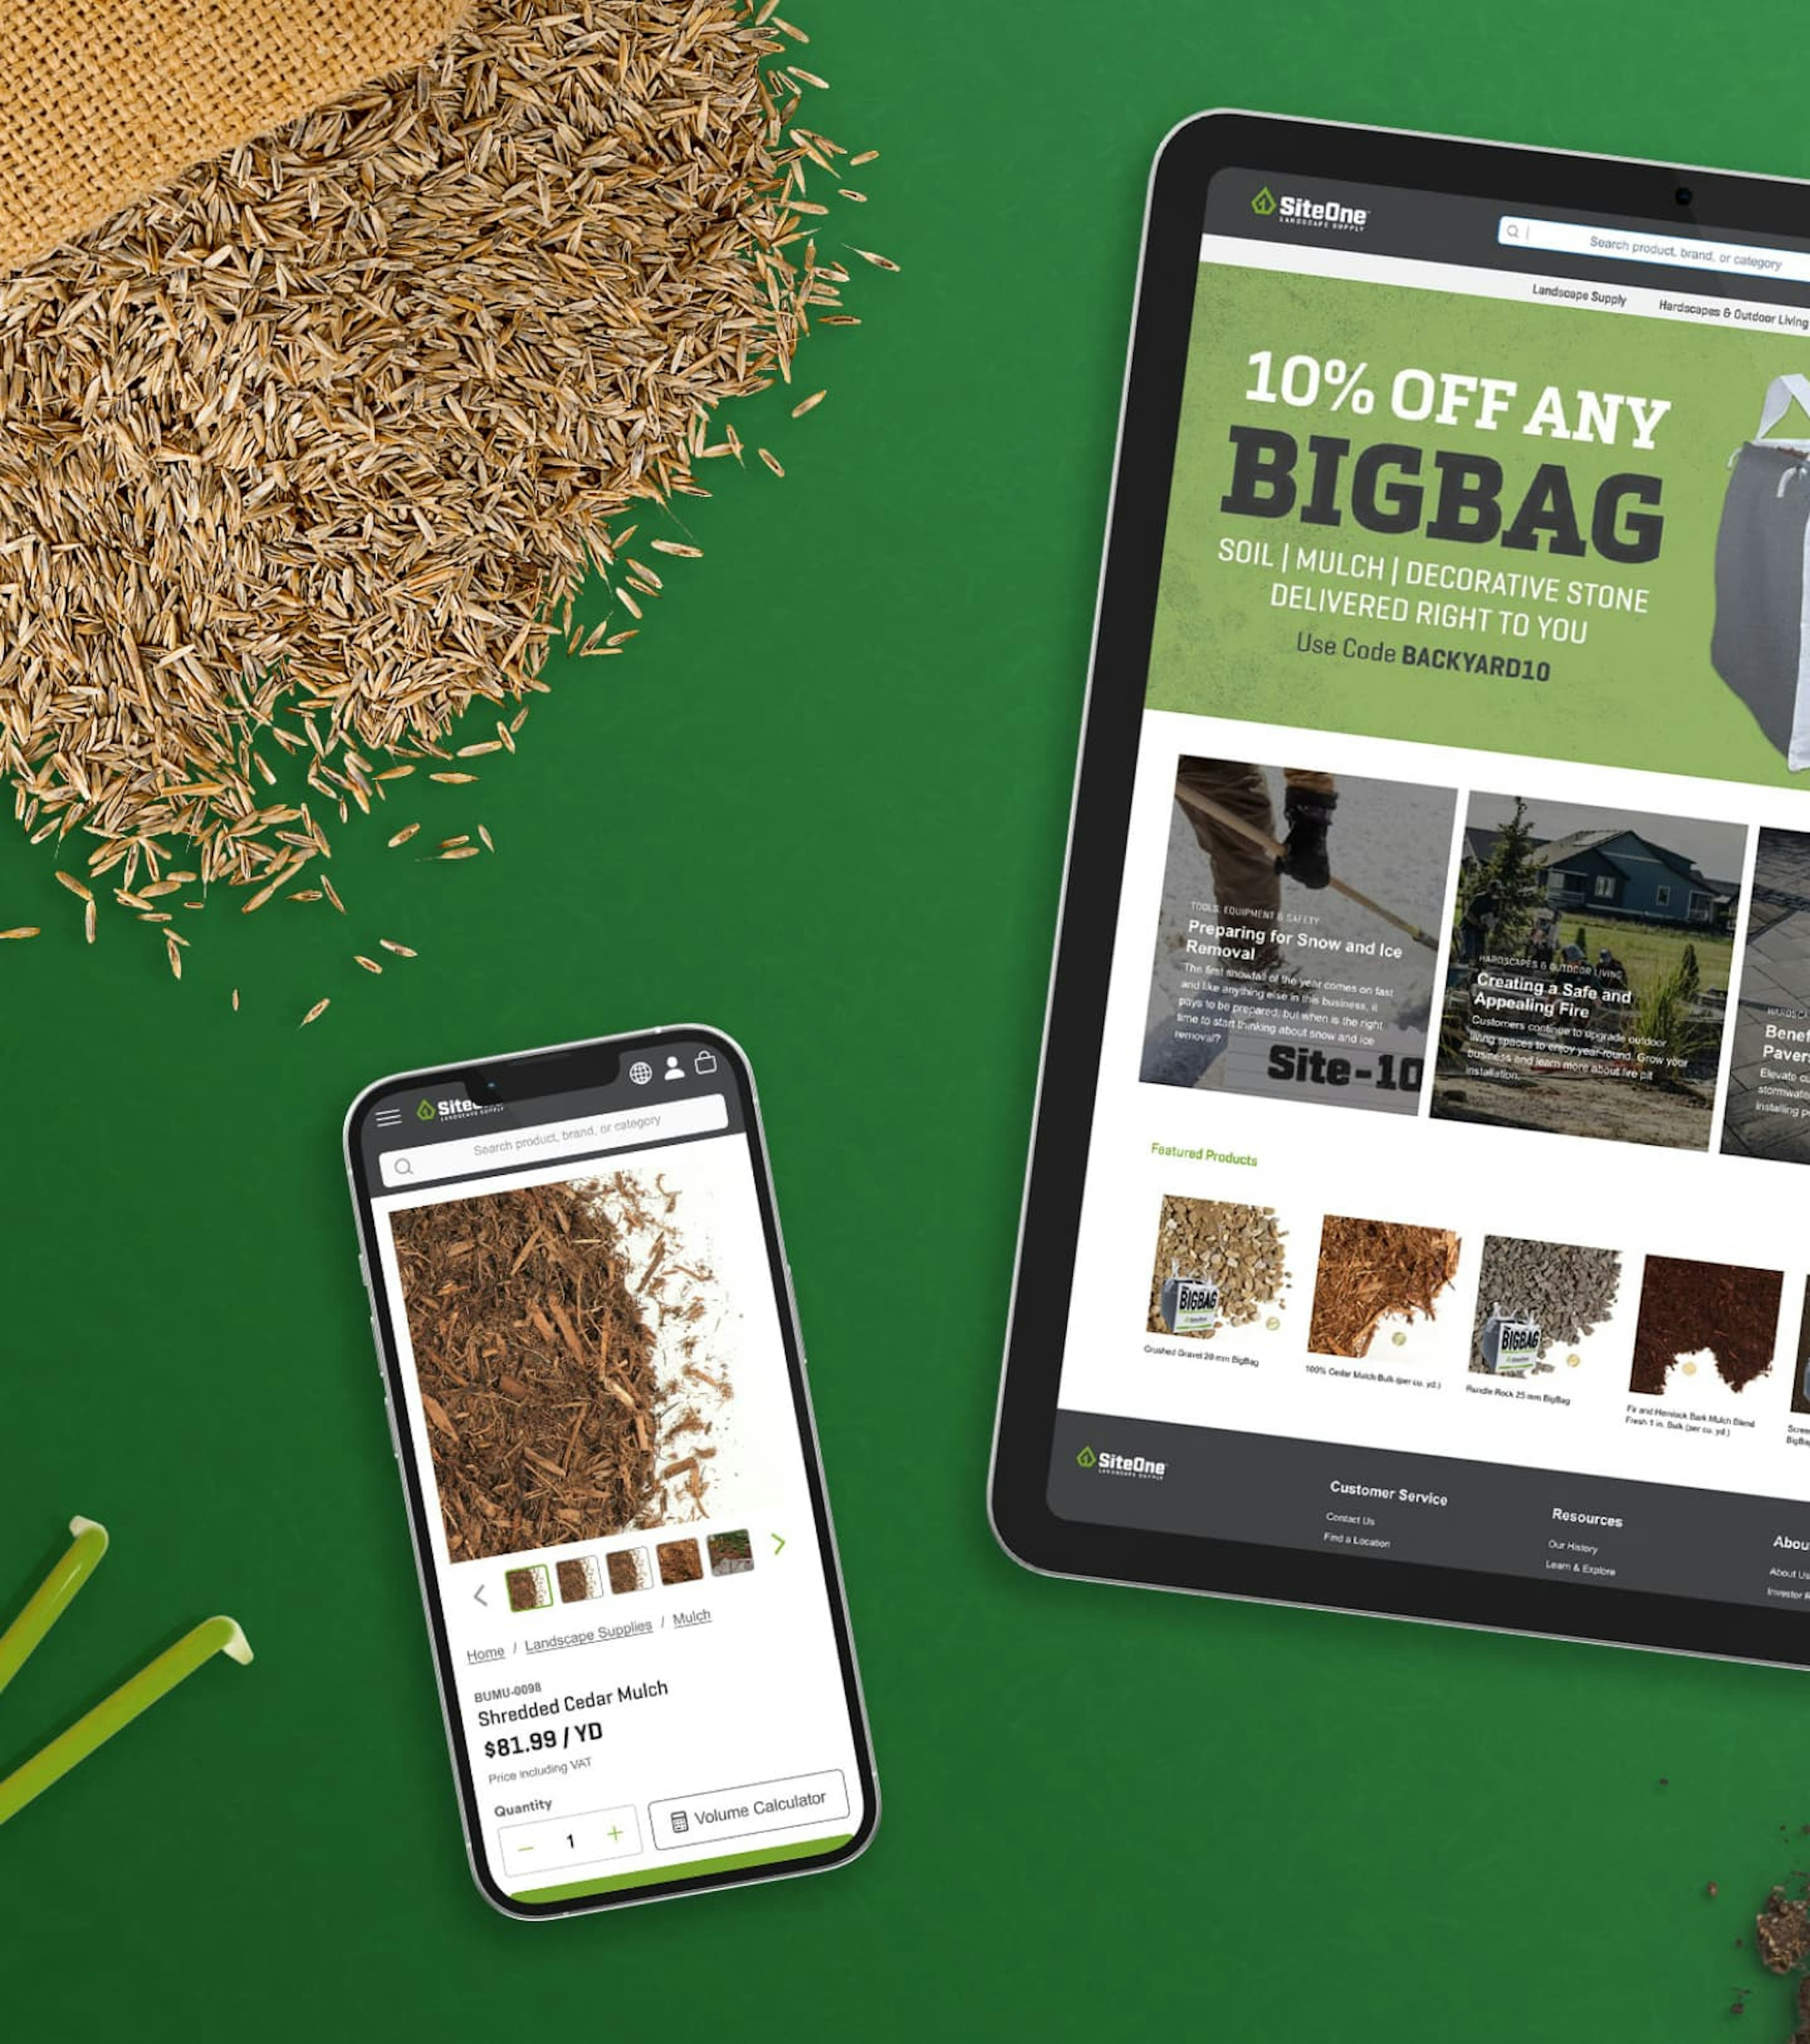 Flatlay of SiteOne website on an iPad and an iPhone surrounded by grass seeds.